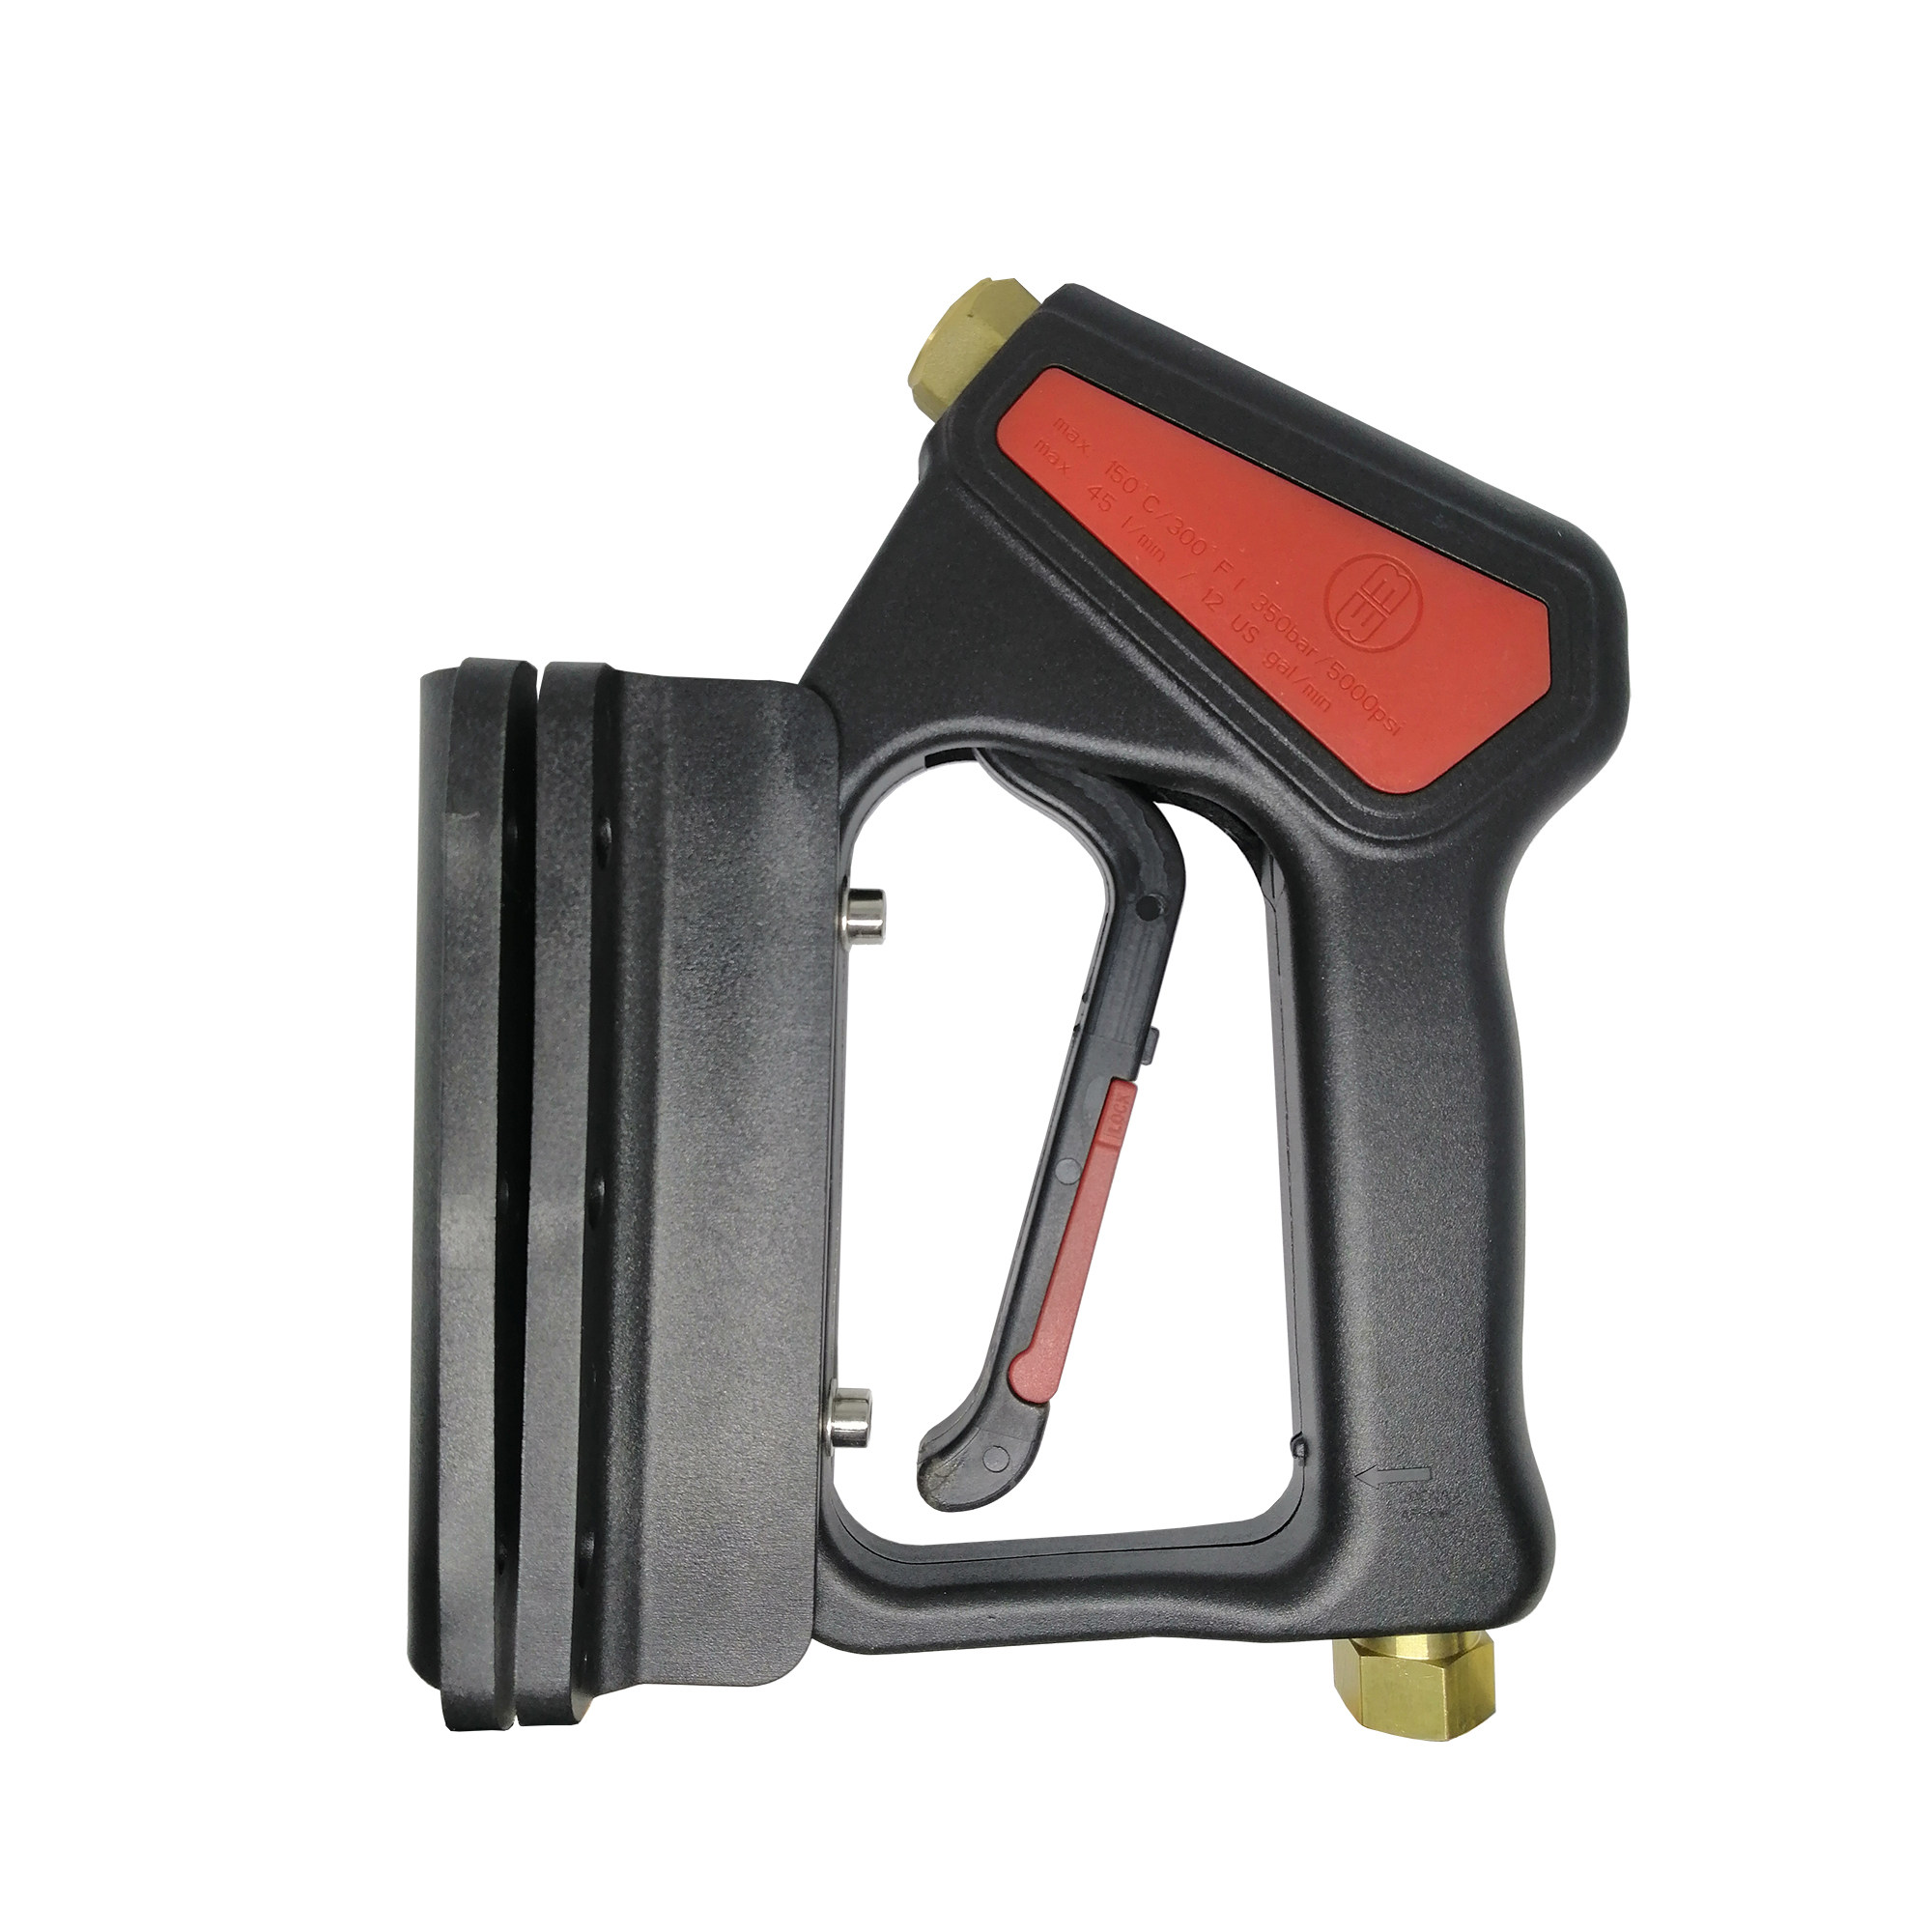 High Pressure Washer Trigger Gun 5000psi with Holder for Surface Cleaner TG5025